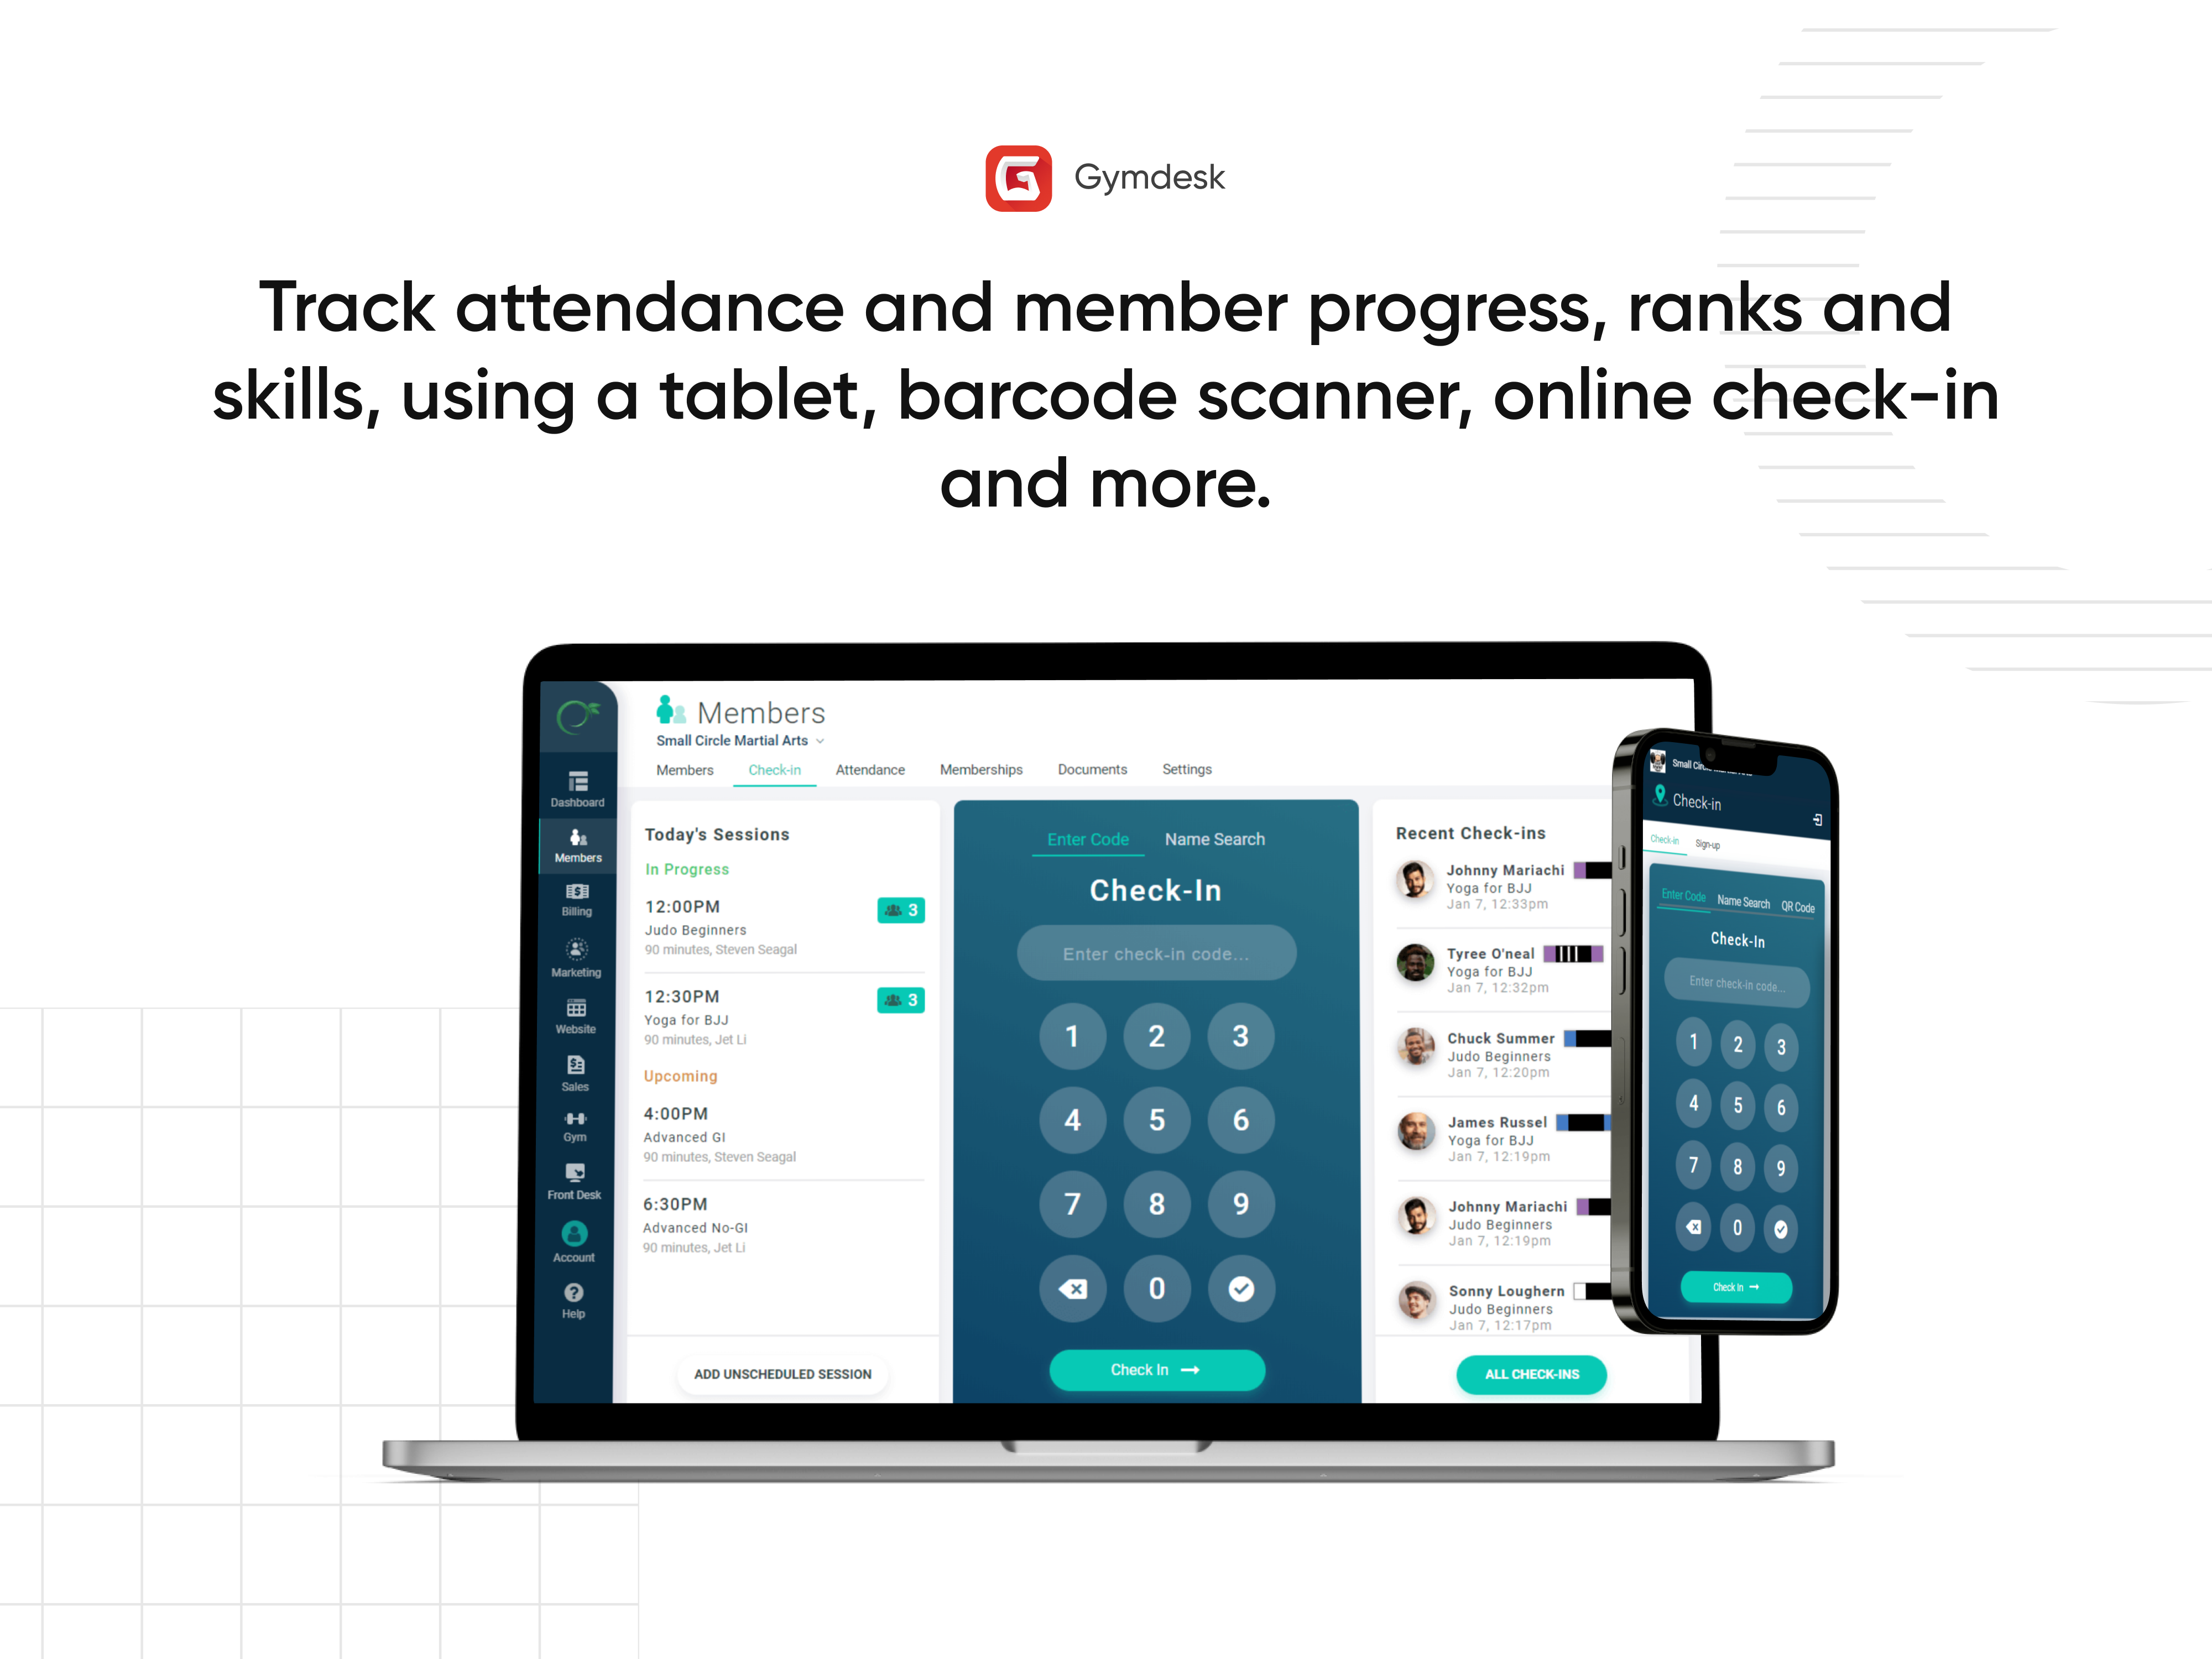 Jerai Gym Software, Gym Software, Best Gym Software, gym management  software, gym management system, fitness software, gym membership software,  easy gym software, fitness management software, fitness studio software